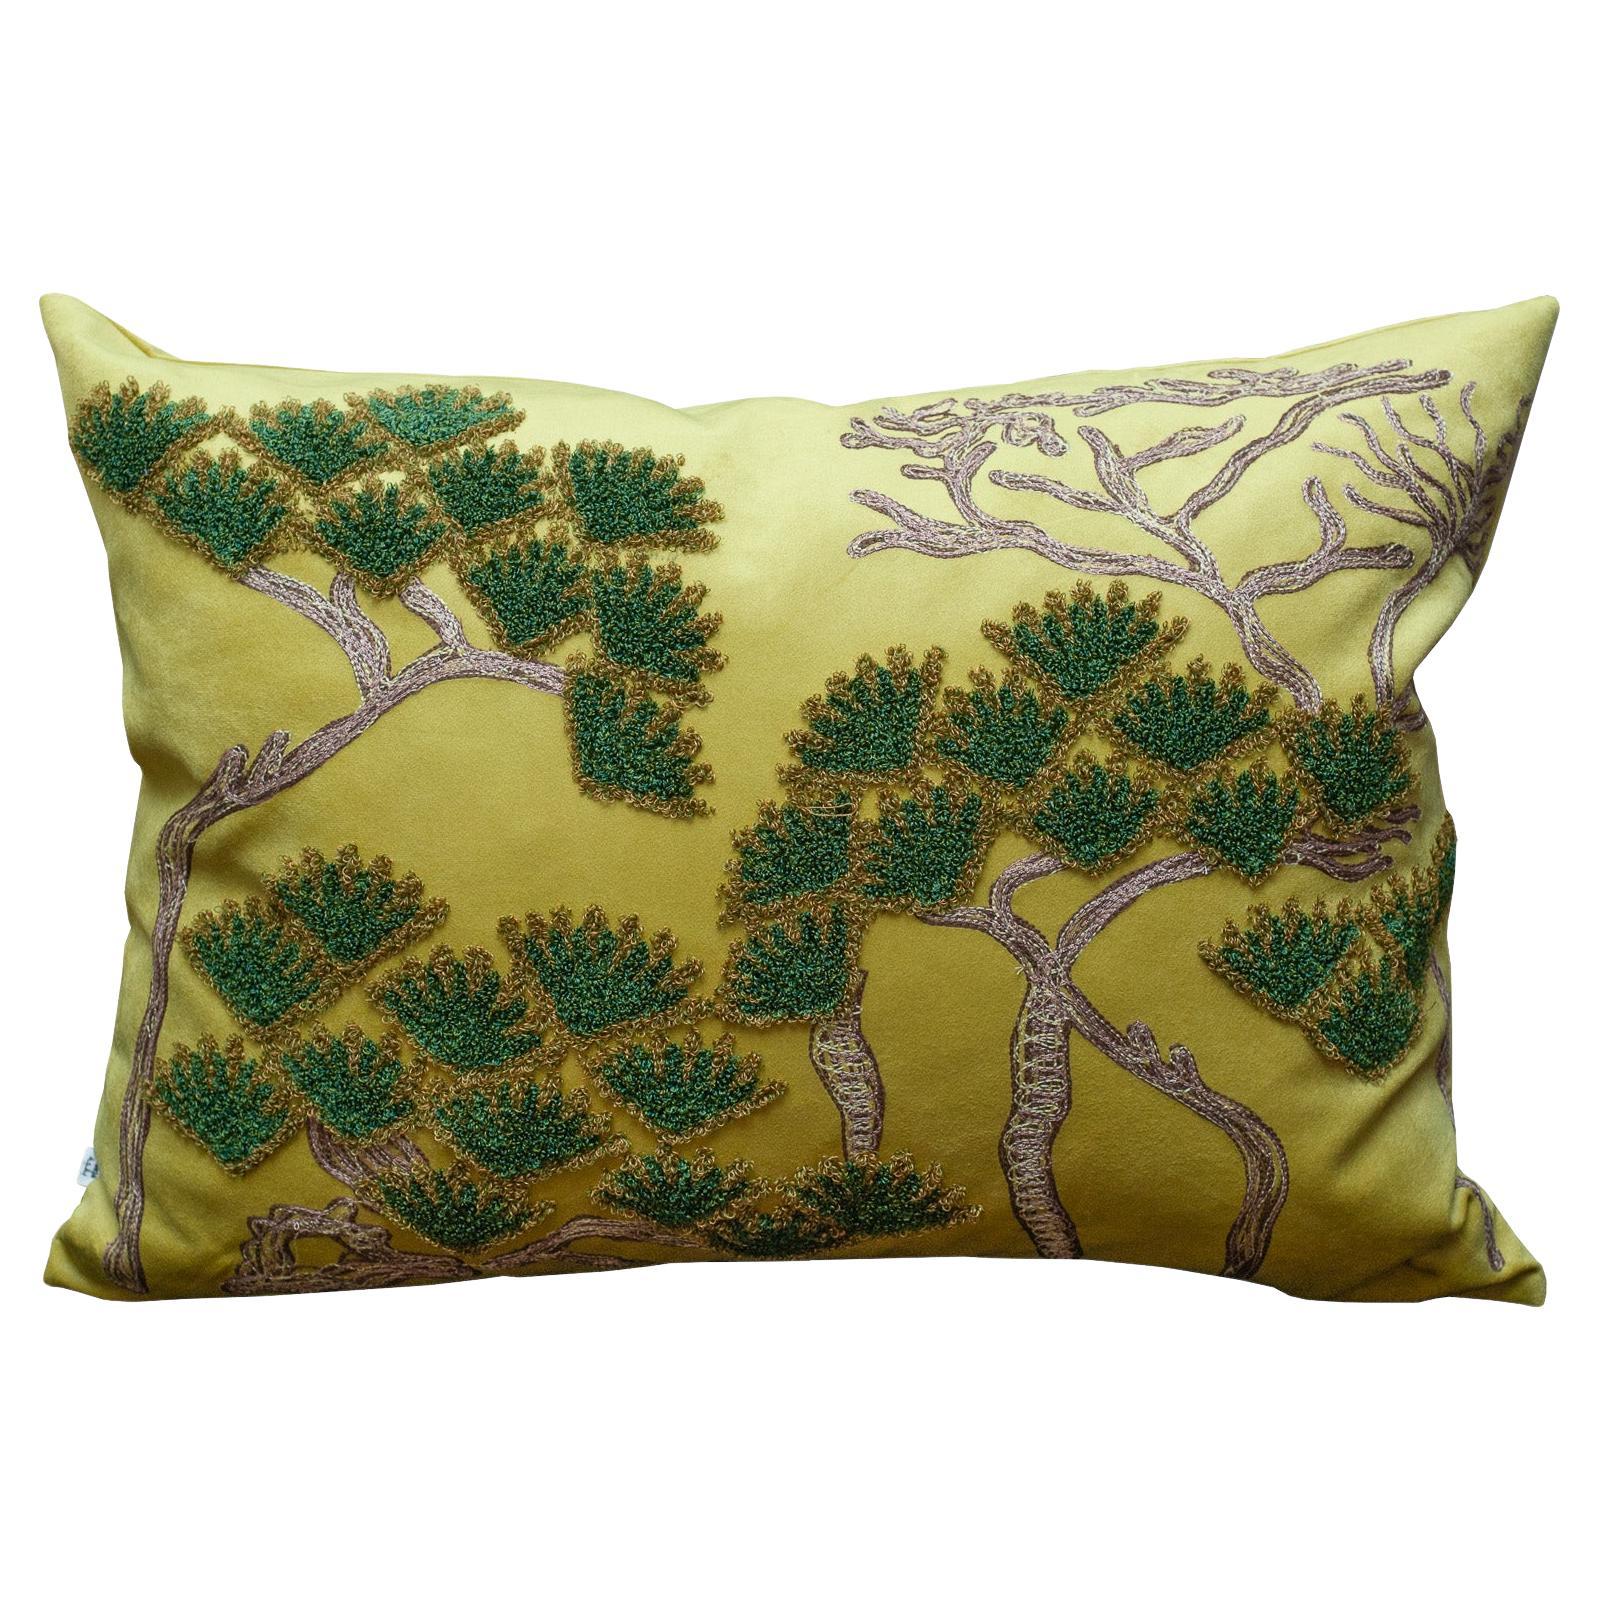 Contemporary Embroidered Pillow on Yellow Green Ultrasuede with Pine Trees For Sale